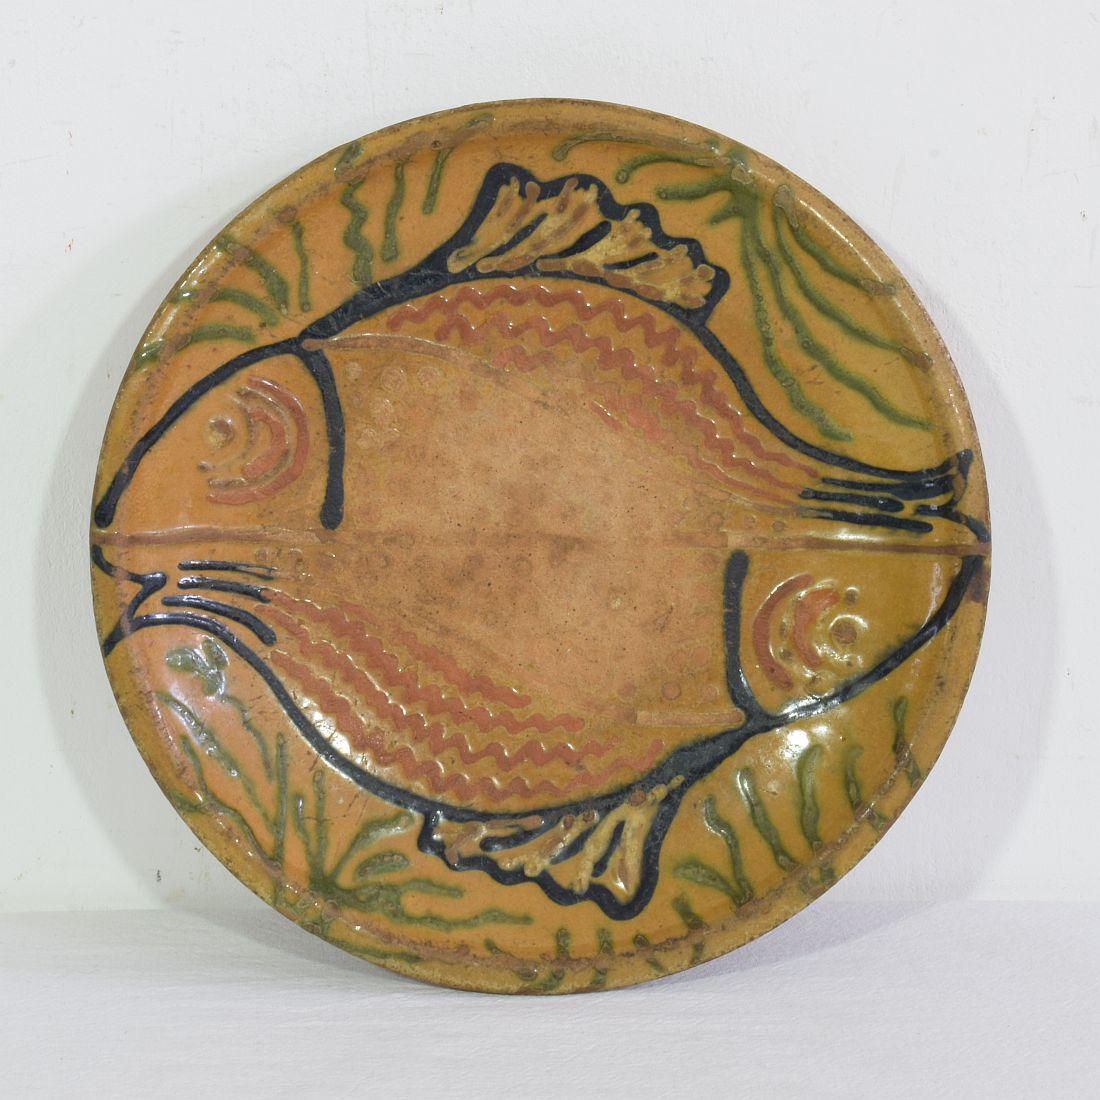 French Provincial French 19th Century Glazed Folk Art Ceramic Platter/ Bowl Depicting Two Fish For Sale